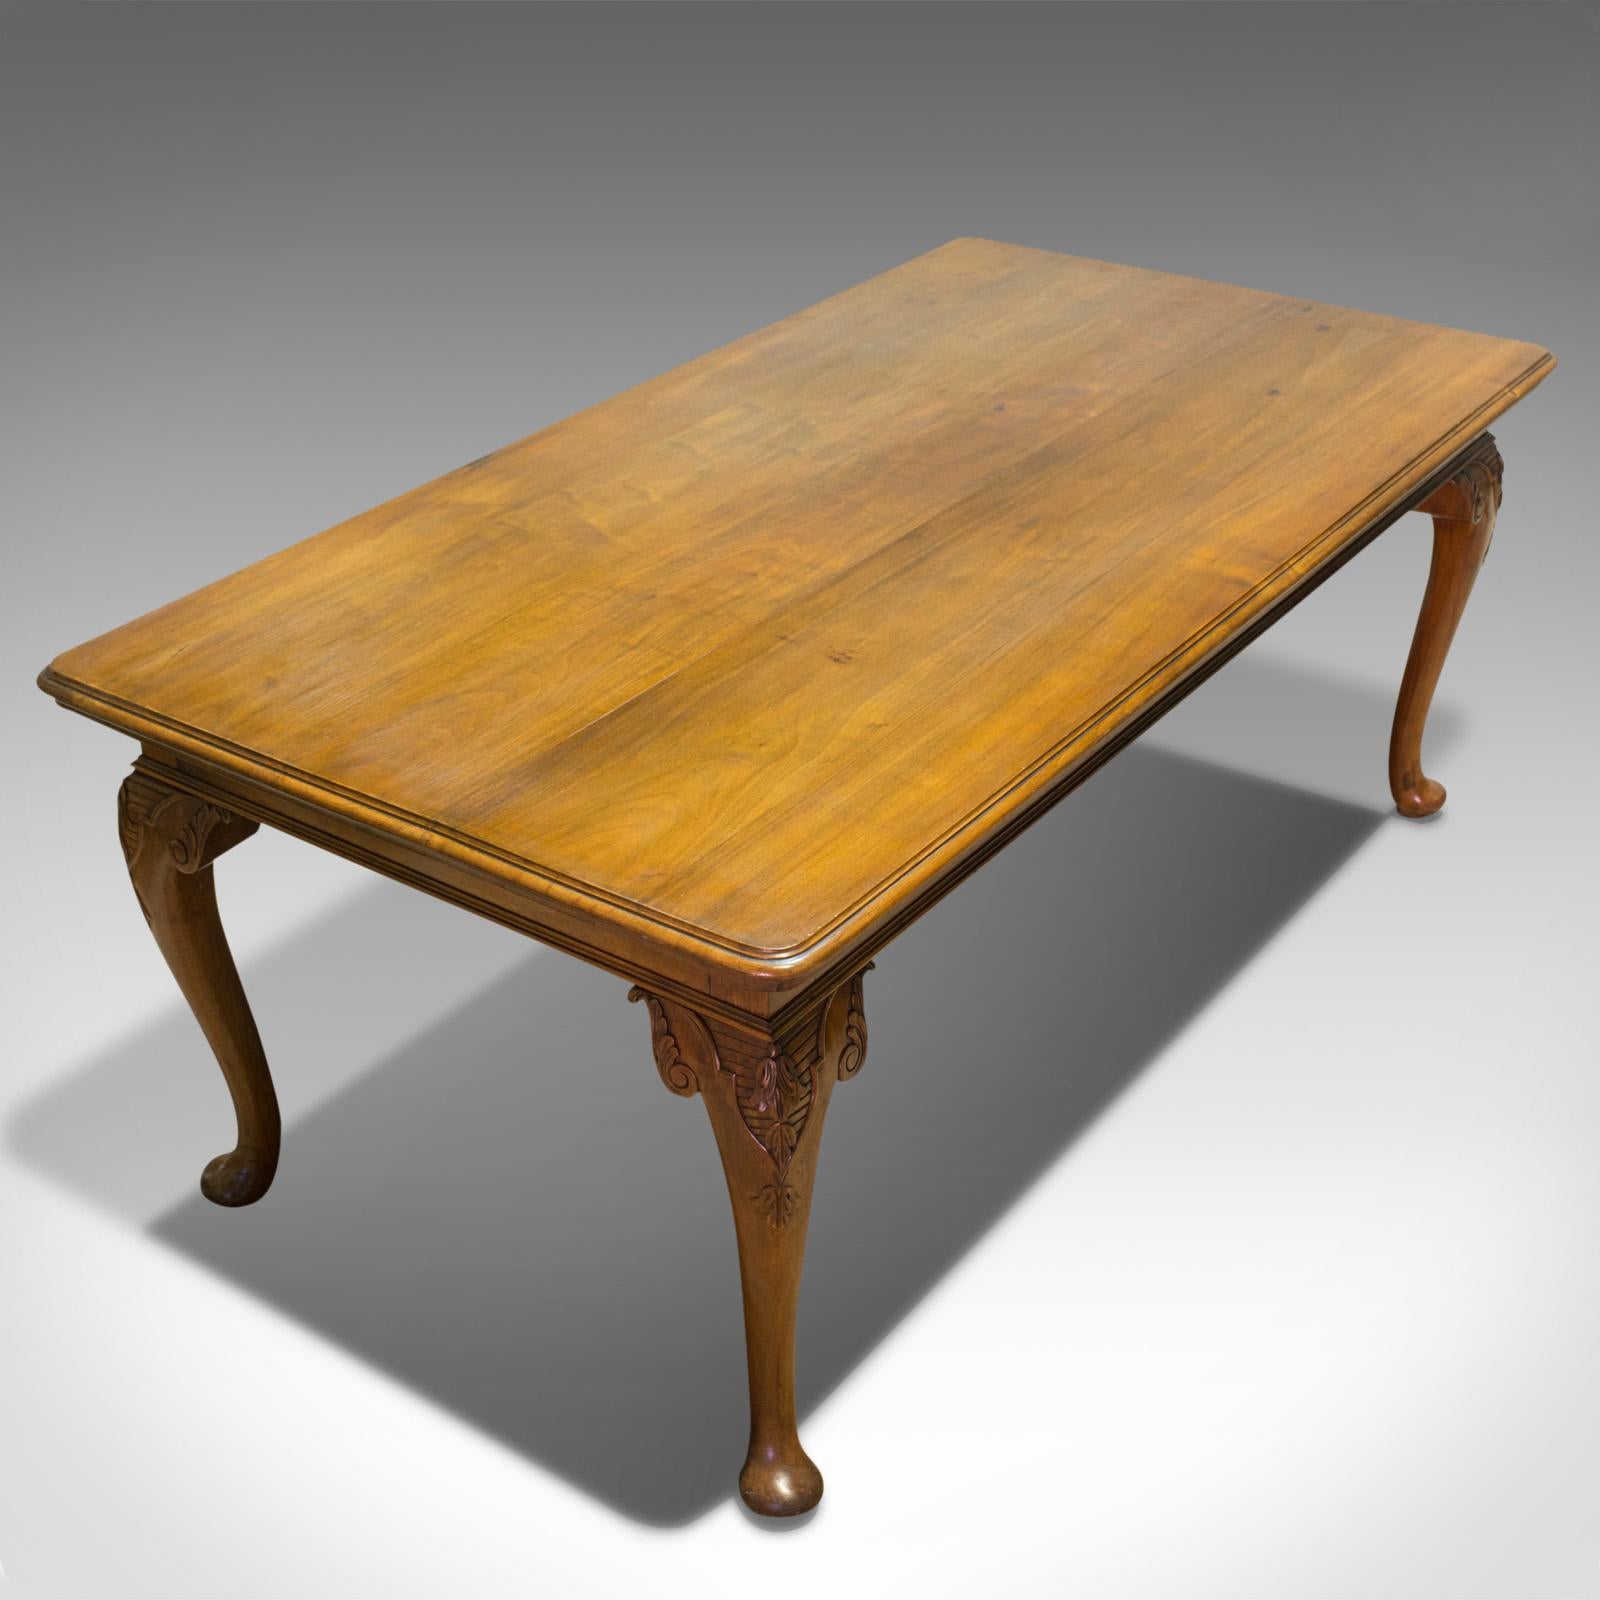 19th Century Large Antique Dining Table, French, Walnut, Country House, Seats 6, circa 1900